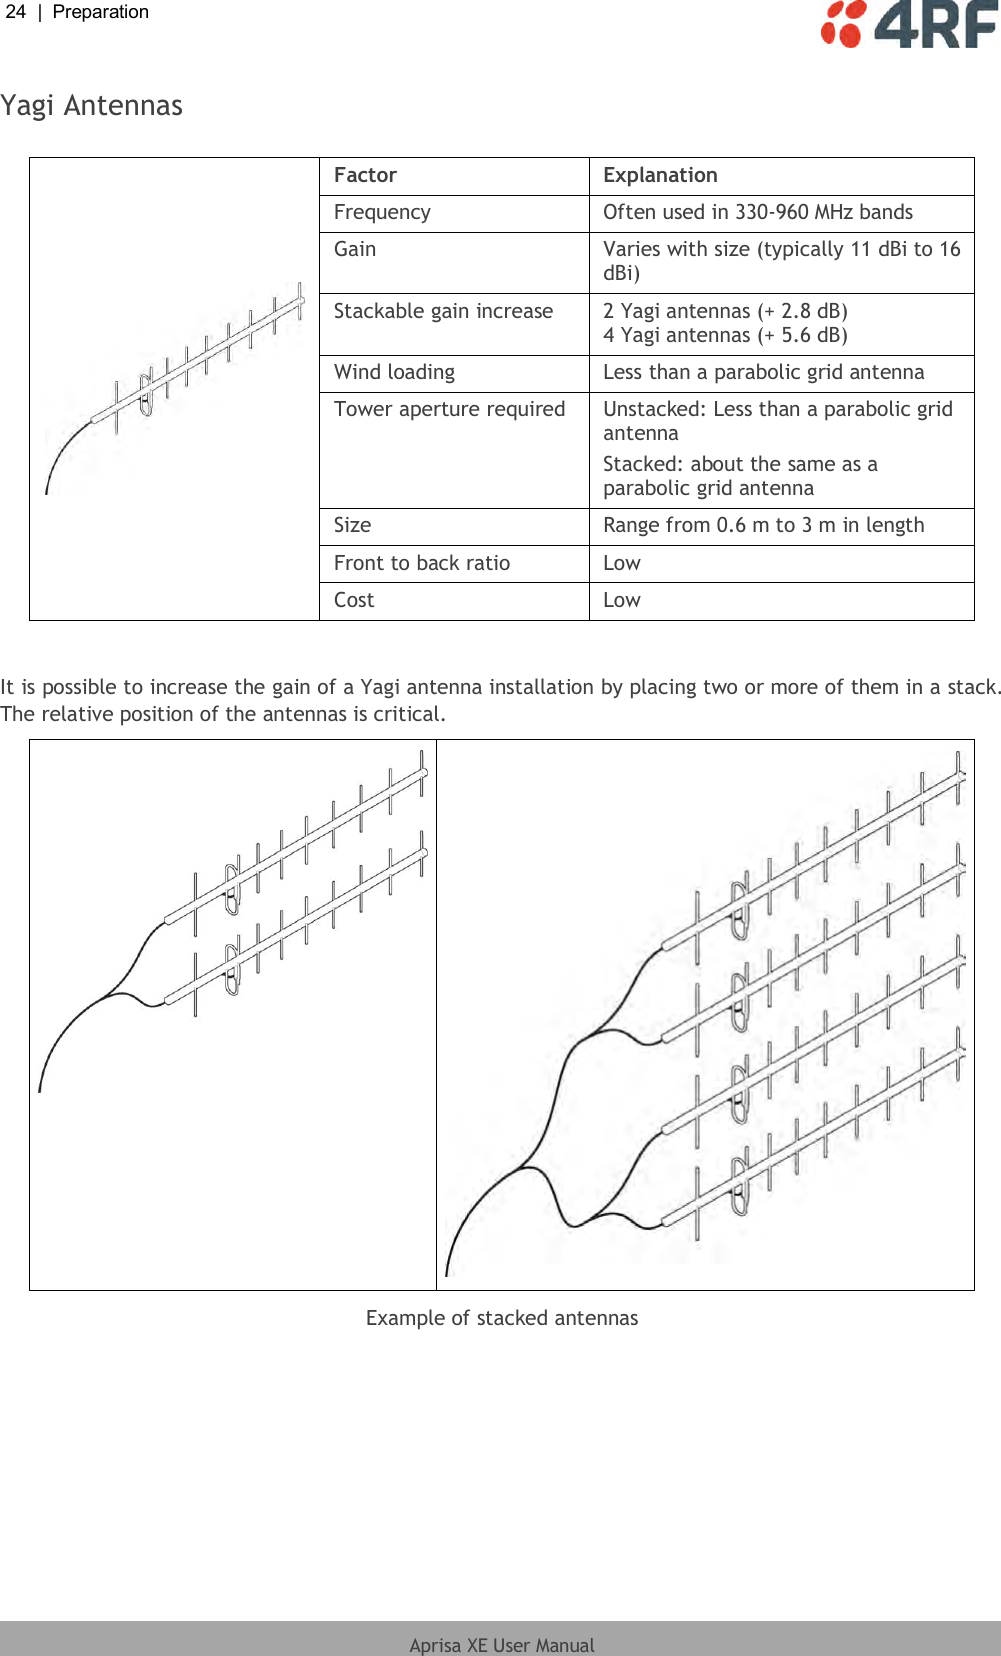 24  |  Preparation   Aprisa XE User Manual  Yagi Antennas   Factor Explanation Frequency Often used in 330-960 MHz bands Gain Varies with size (typically 11 dBi to 16 dBi) Stackable gain increase 2 Yagi antennas (+ 2.8 dB) 4 Yagi antennas (+ 5.6 dB) Wind loading Less than a parabolic grid antenna Tower aperture required Unstacked: Less than a parabolic grid antenna Stacked: about the same as a parabolic grid antenna Size Range from 0.6 m to 3 m in length Front to back ratio Low Cost Low  It is possible to increase the gain of a Yagi antenna installation by placing two or more of them in a stack. The relative position of the antennas is critical.   Example of stacked antennas  